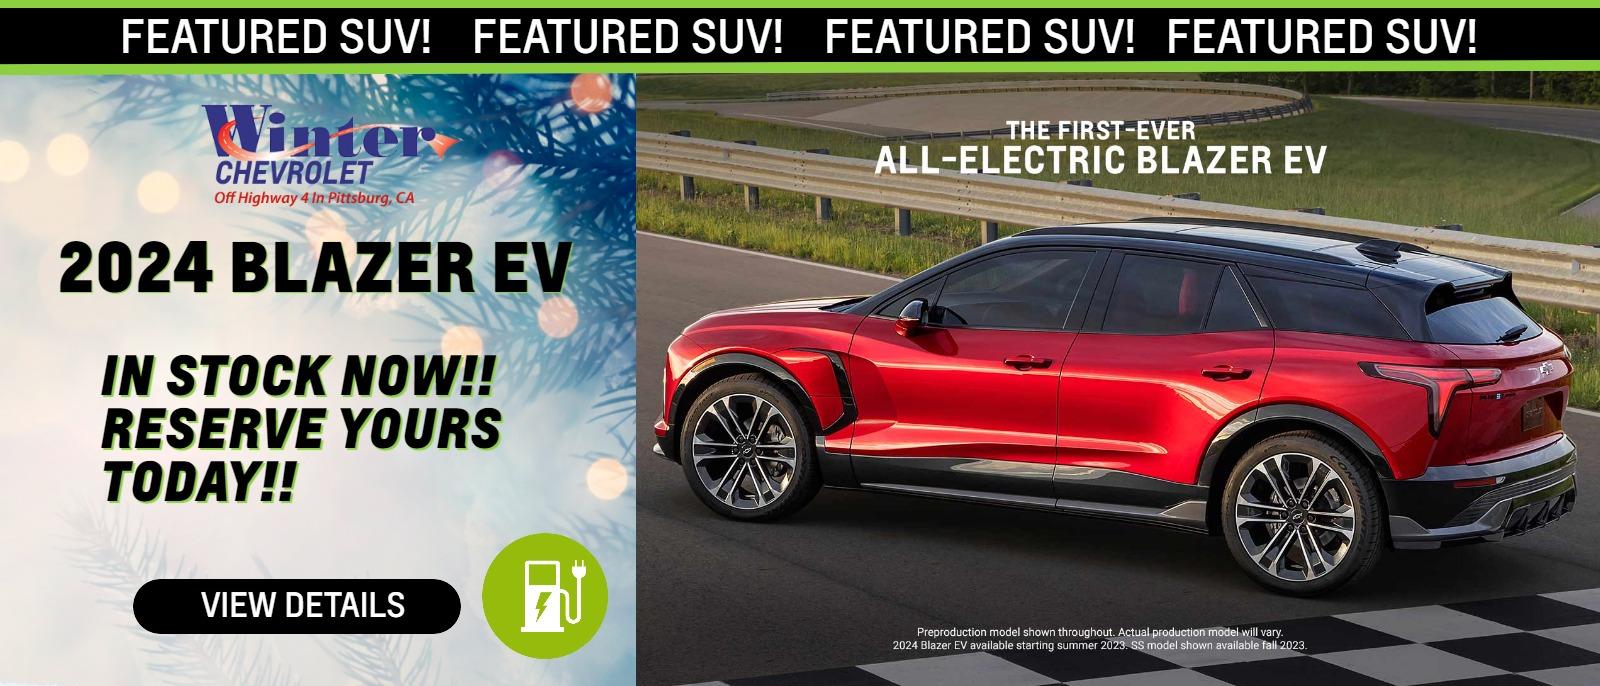 THE FIRST EVER ALL-ELECTRIC CHEVY BLAZER EV. ARRIVING SOON! RESERVE YOURS TODAY! VIEW DETAILS.